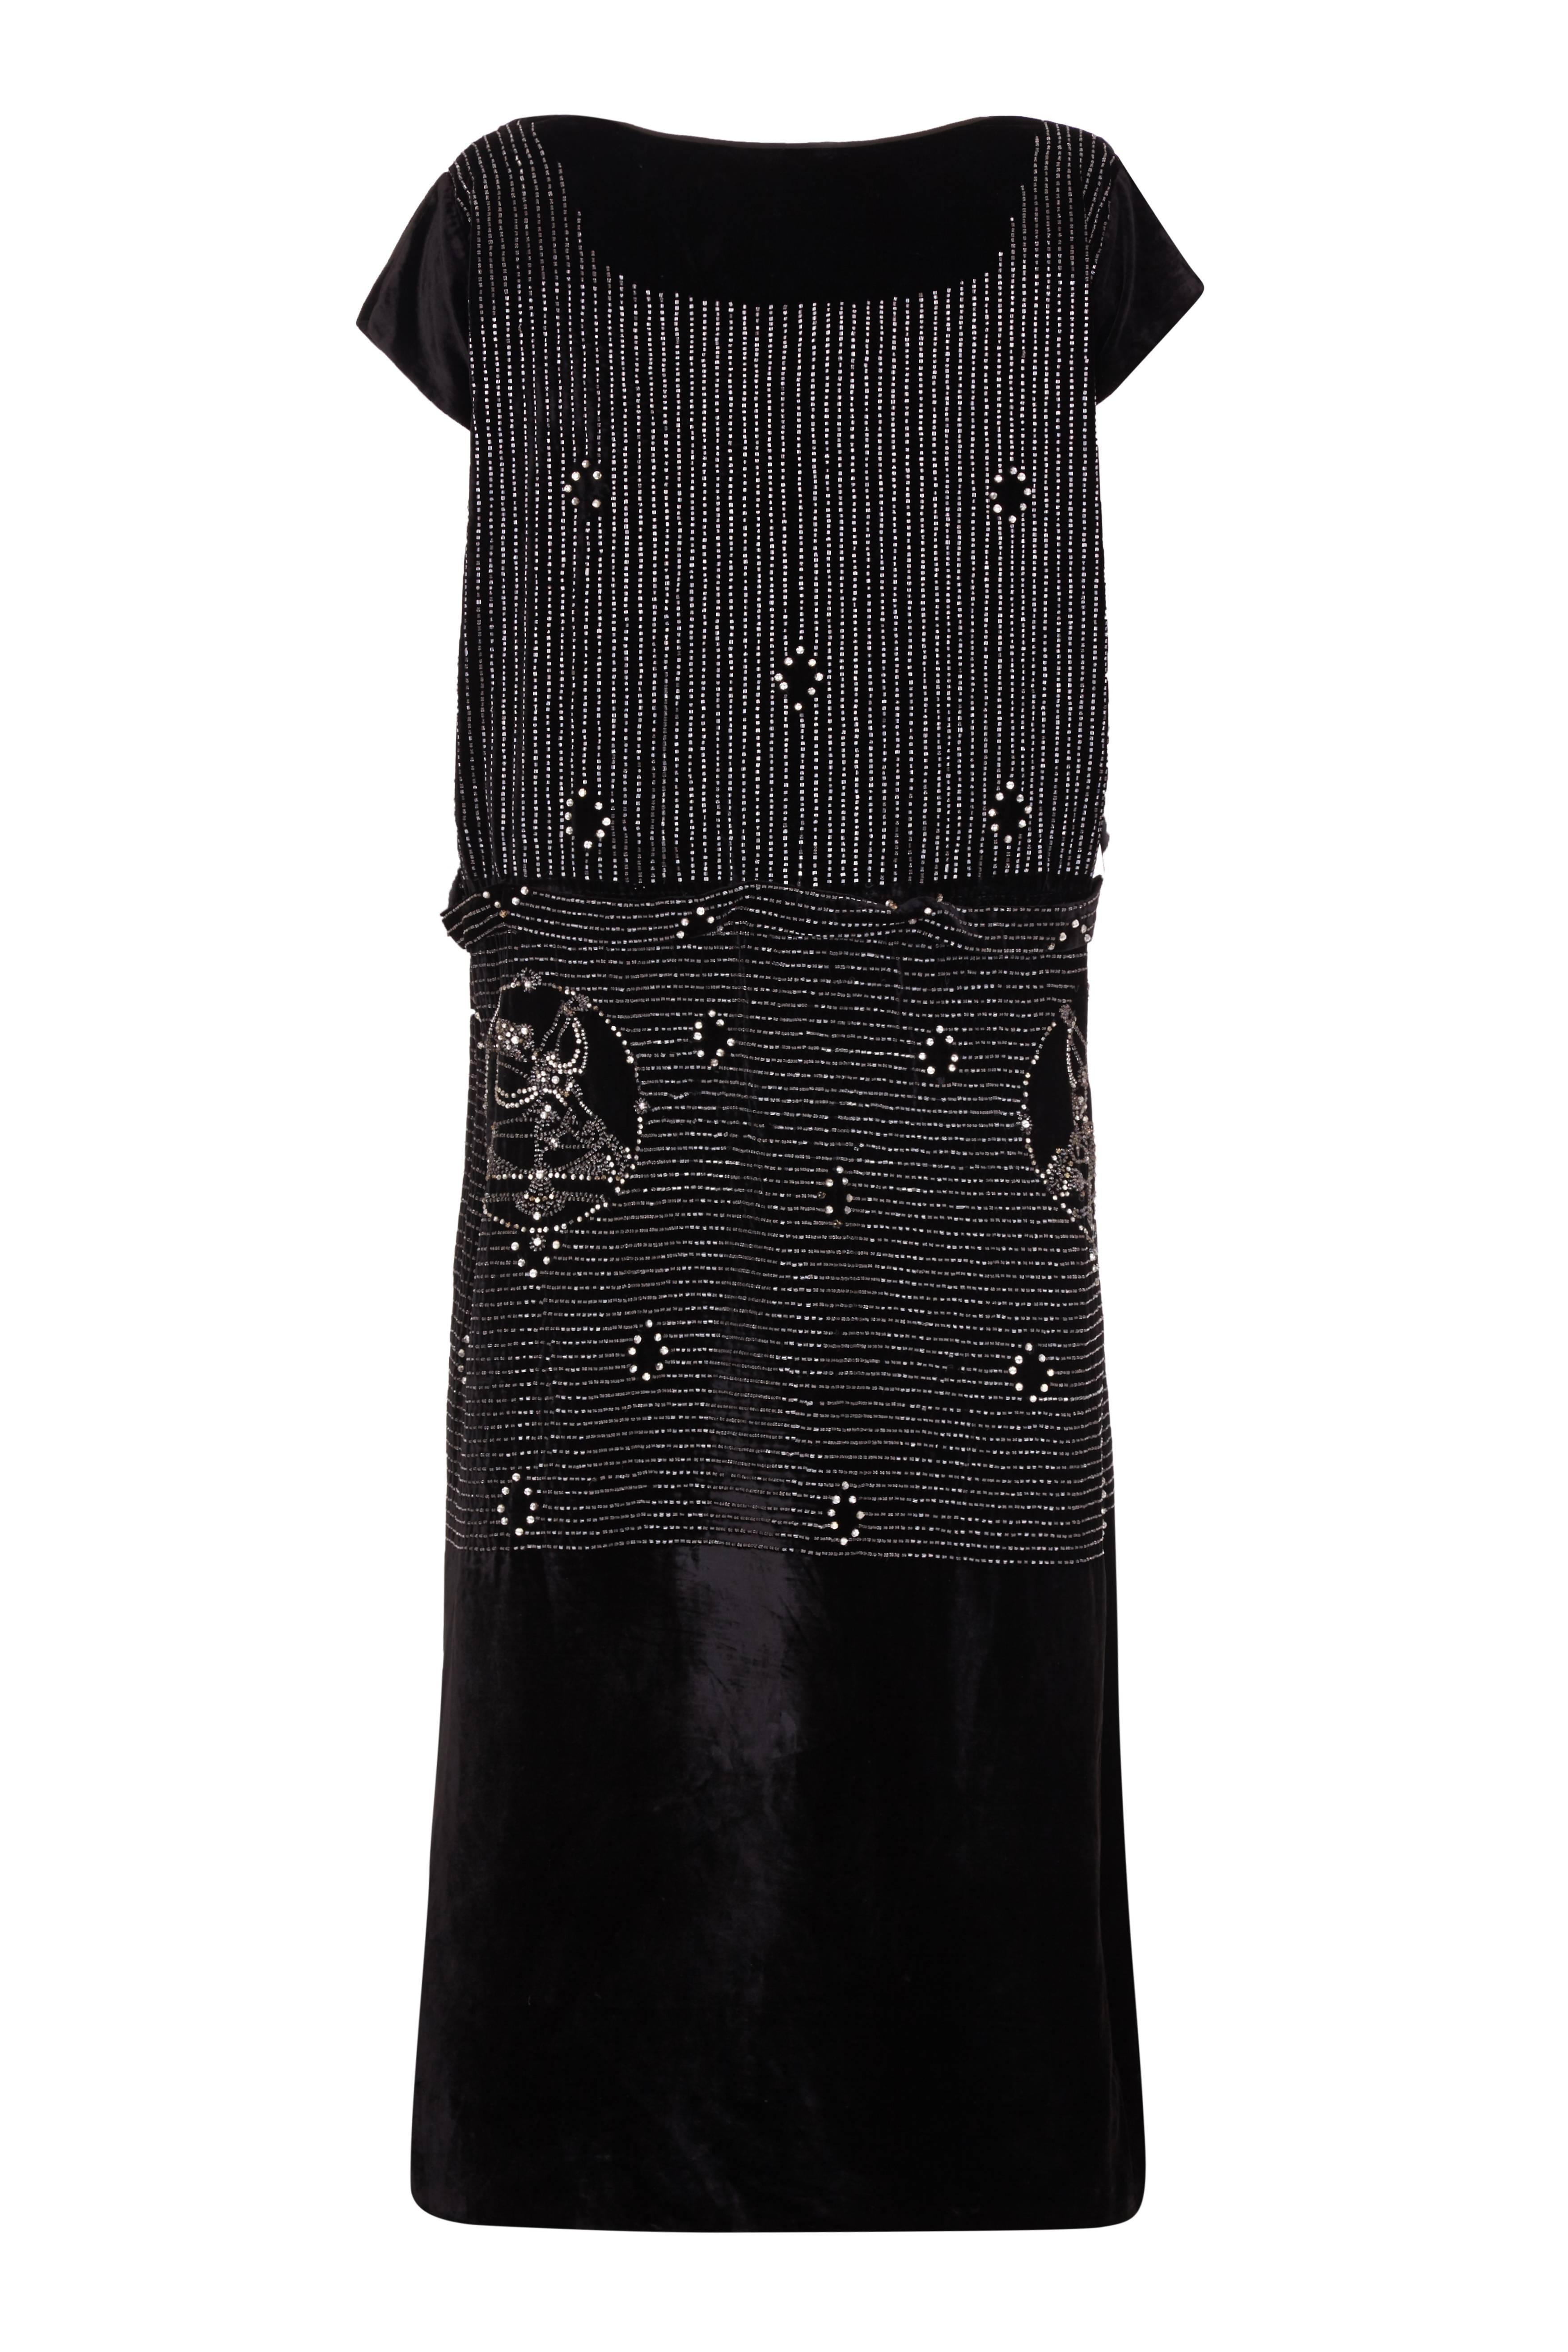 Amazing black silk velvet vintage flapper dress with small bugle beaded rows and dancer motifs.  The dress features an attached original belt, cap sleeves and is straight cut in classic flapper style.  There is a Californian label, Mary Millerick,